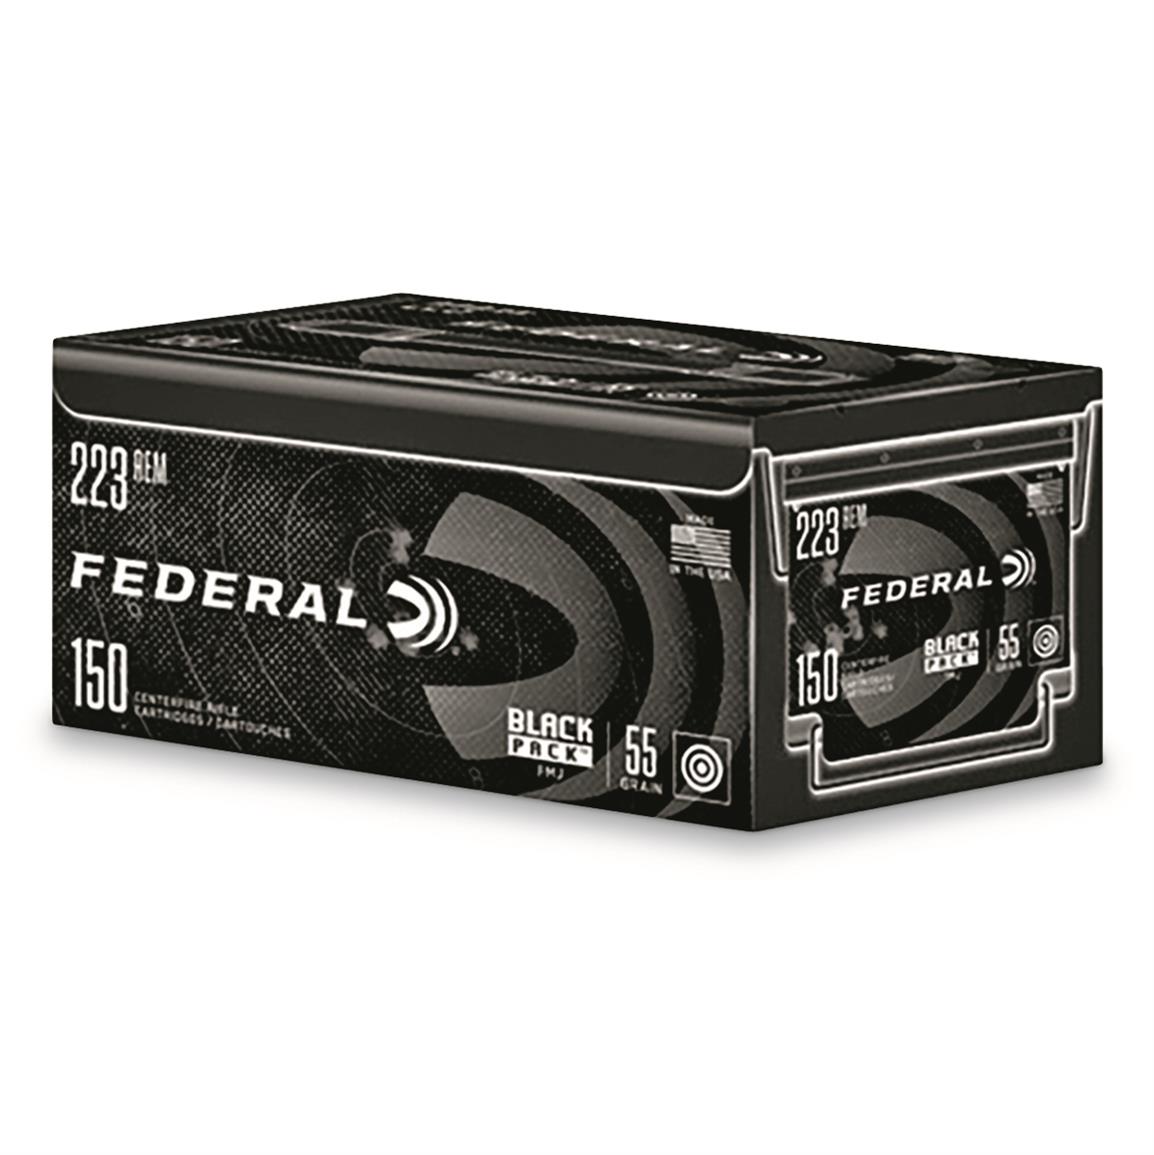 federal-black-pack-223-5-56x45mm-fmj-55-grain-150-rounds